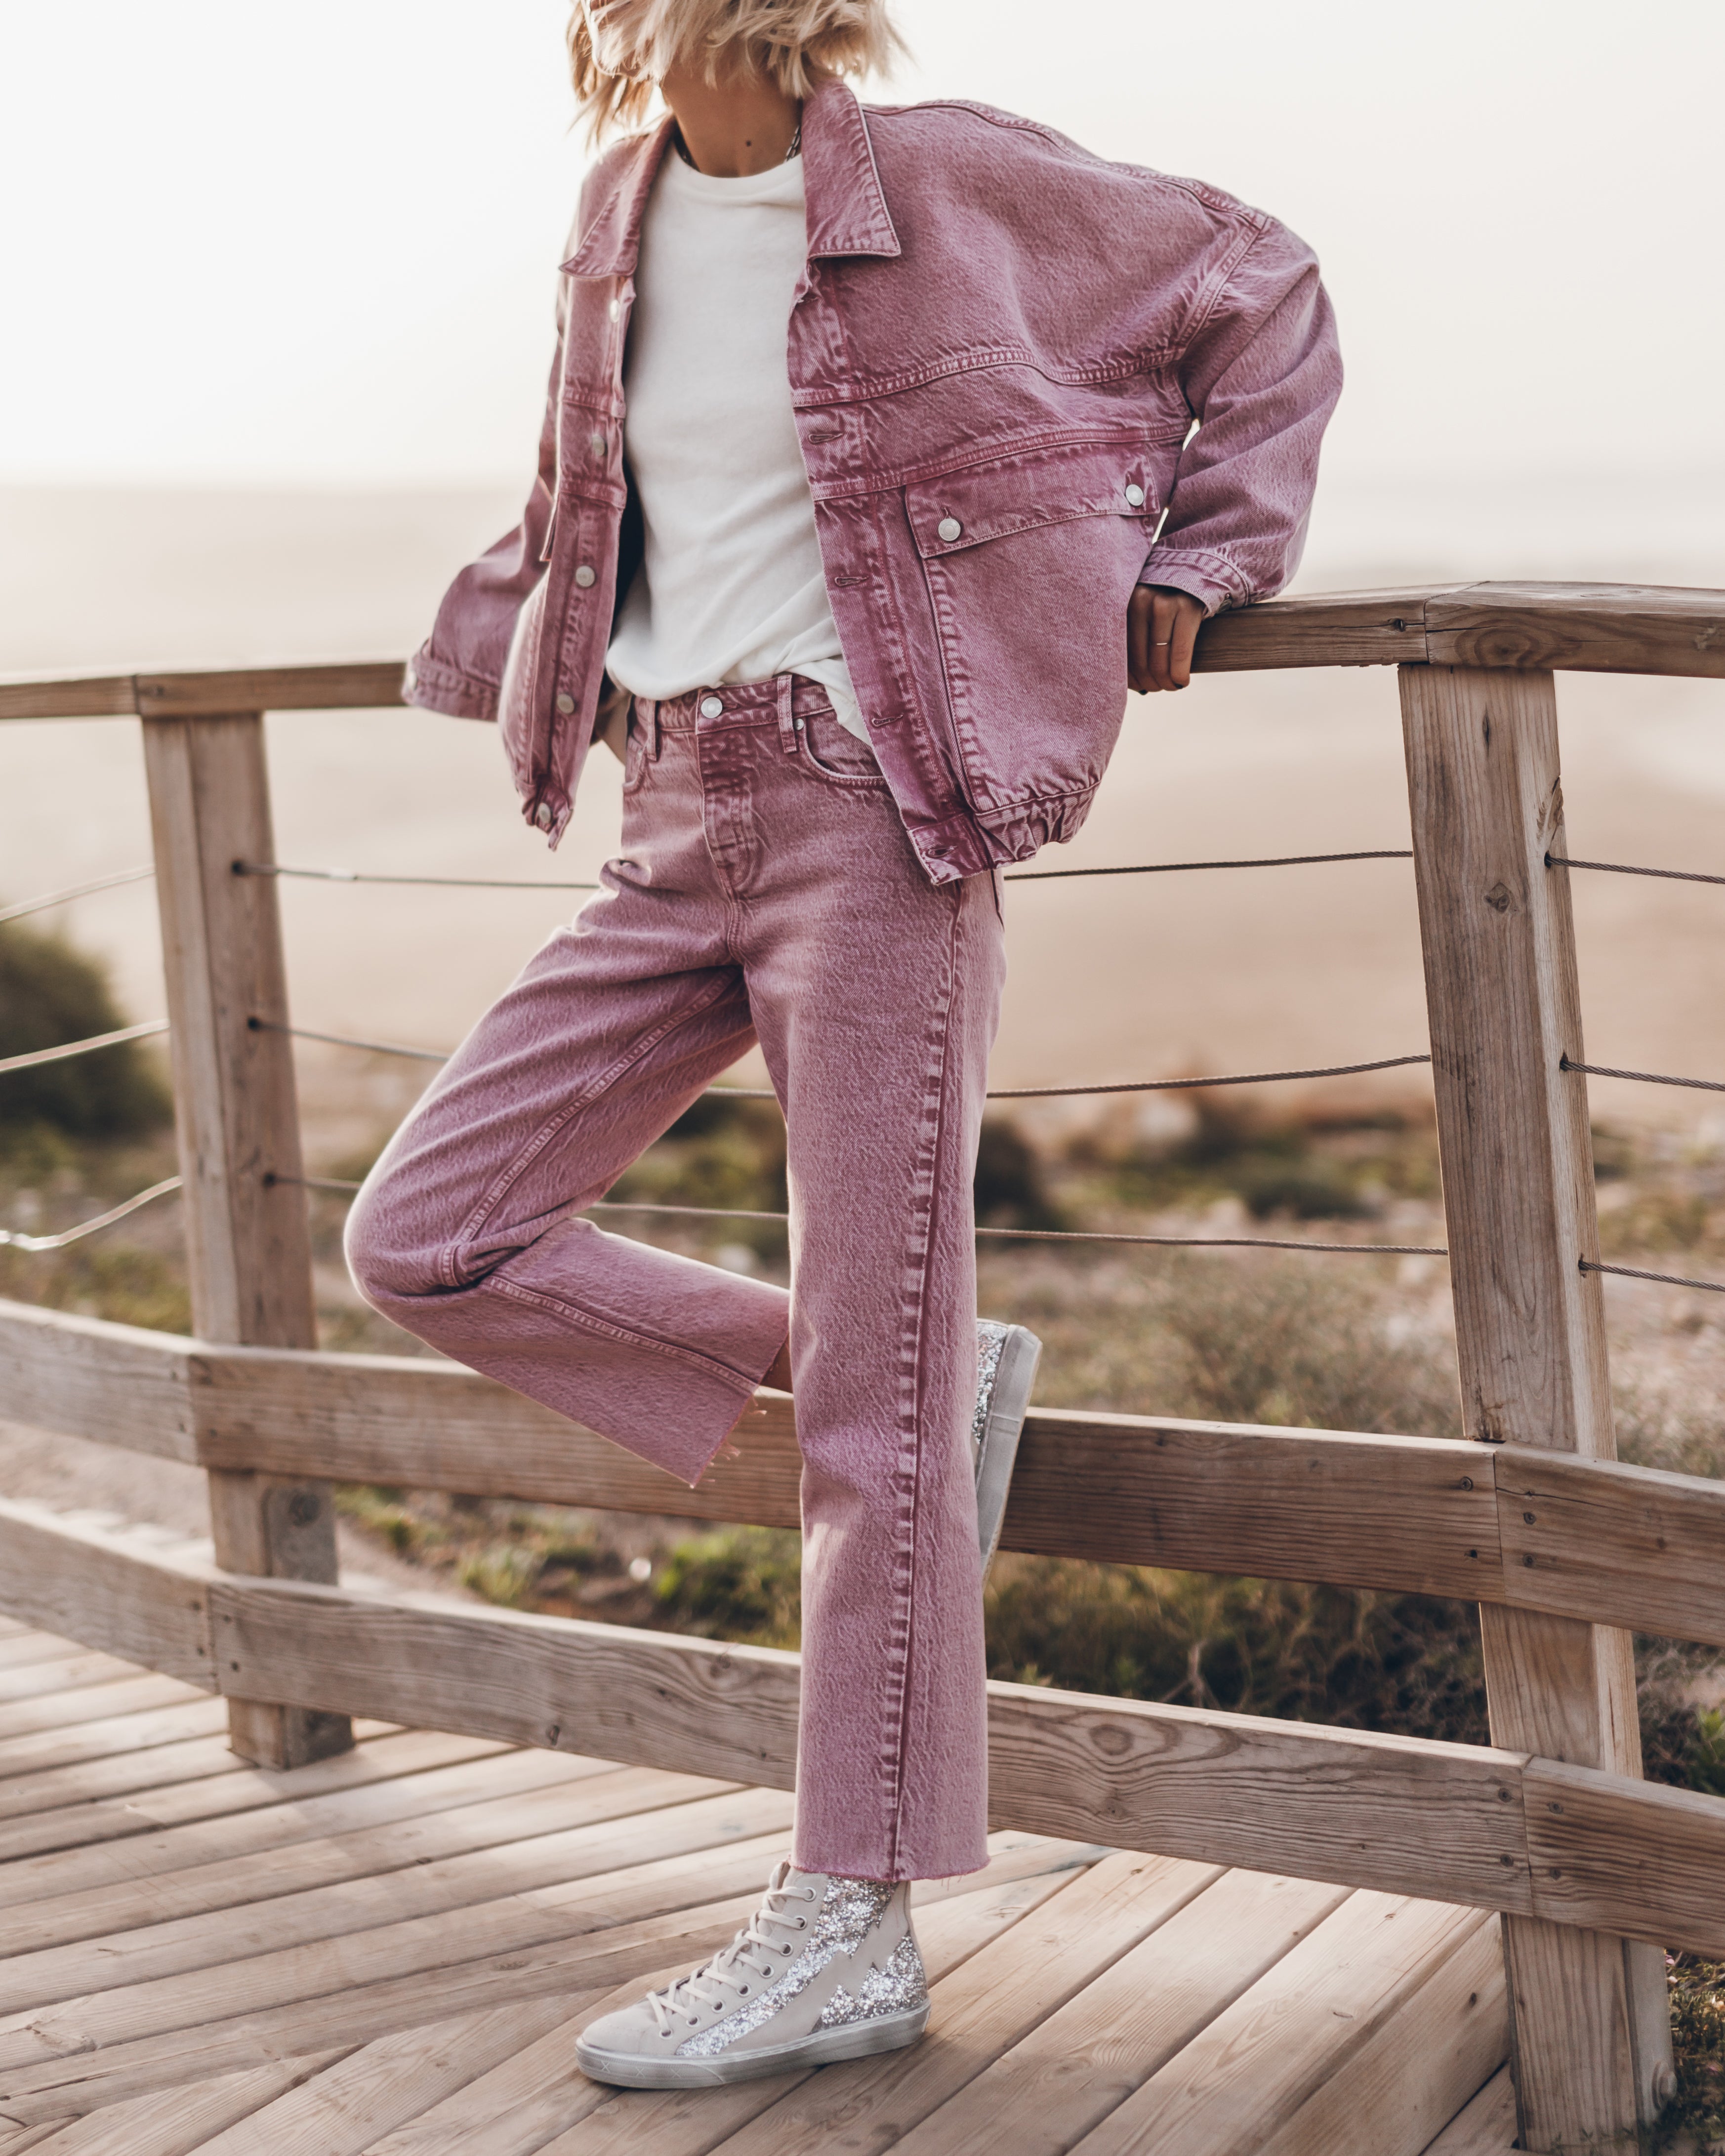 The Pink Faded Cropped Straight Jeans